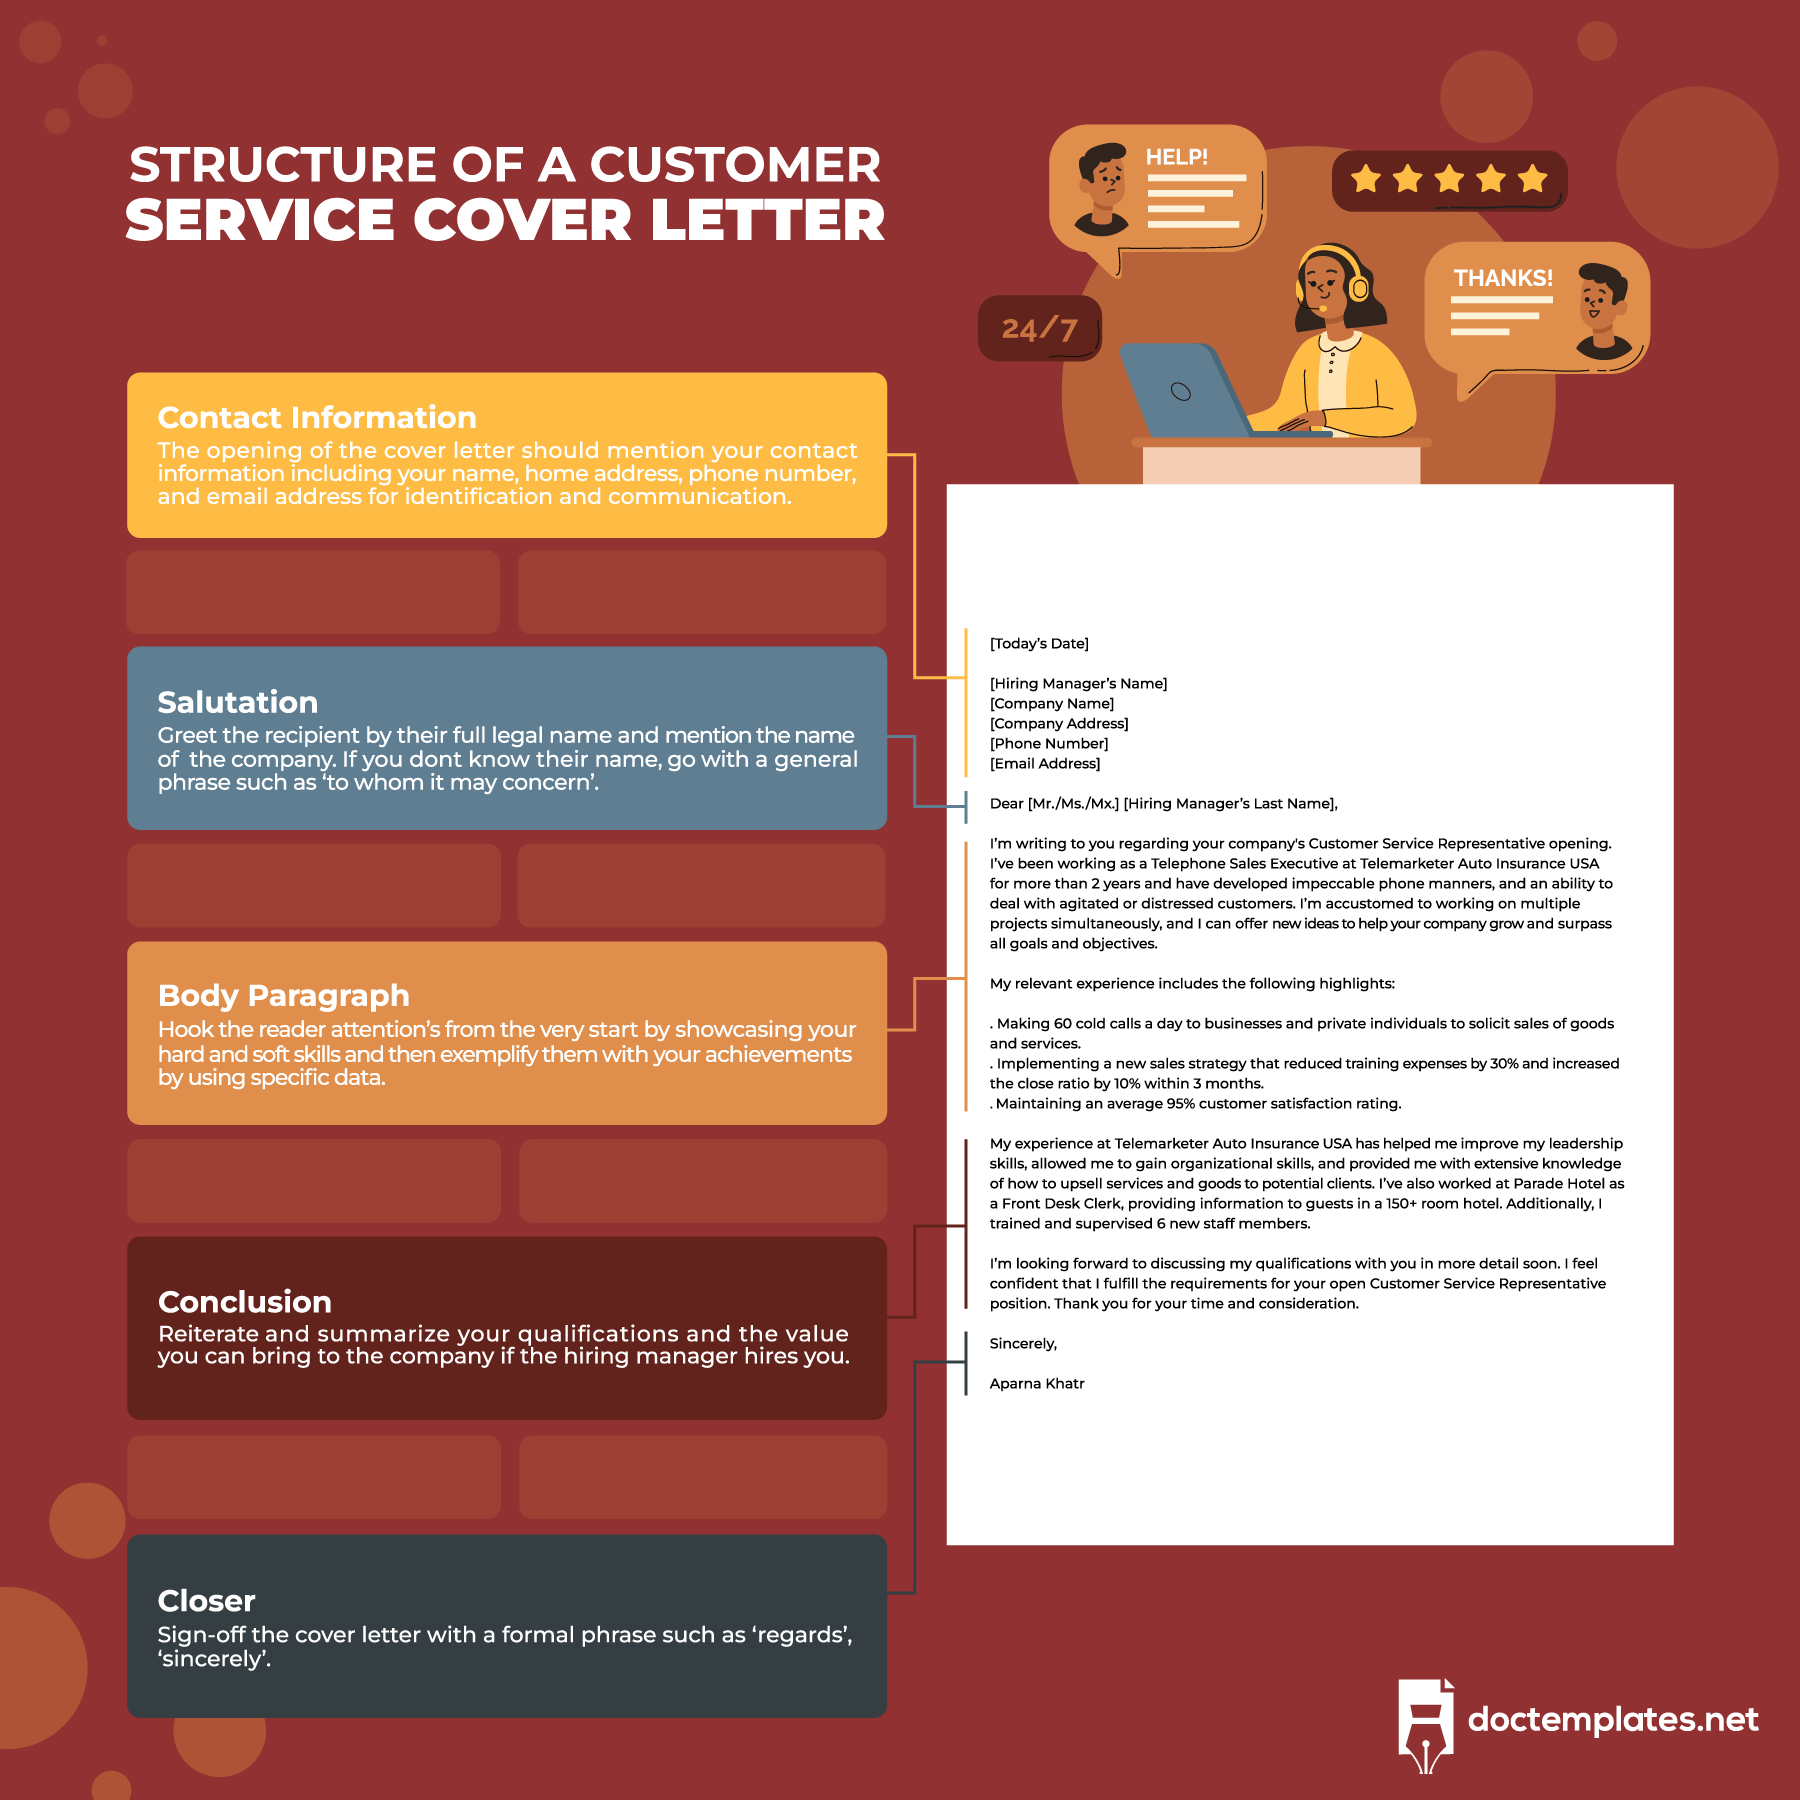 This infographic is about customer service cover letter structure.